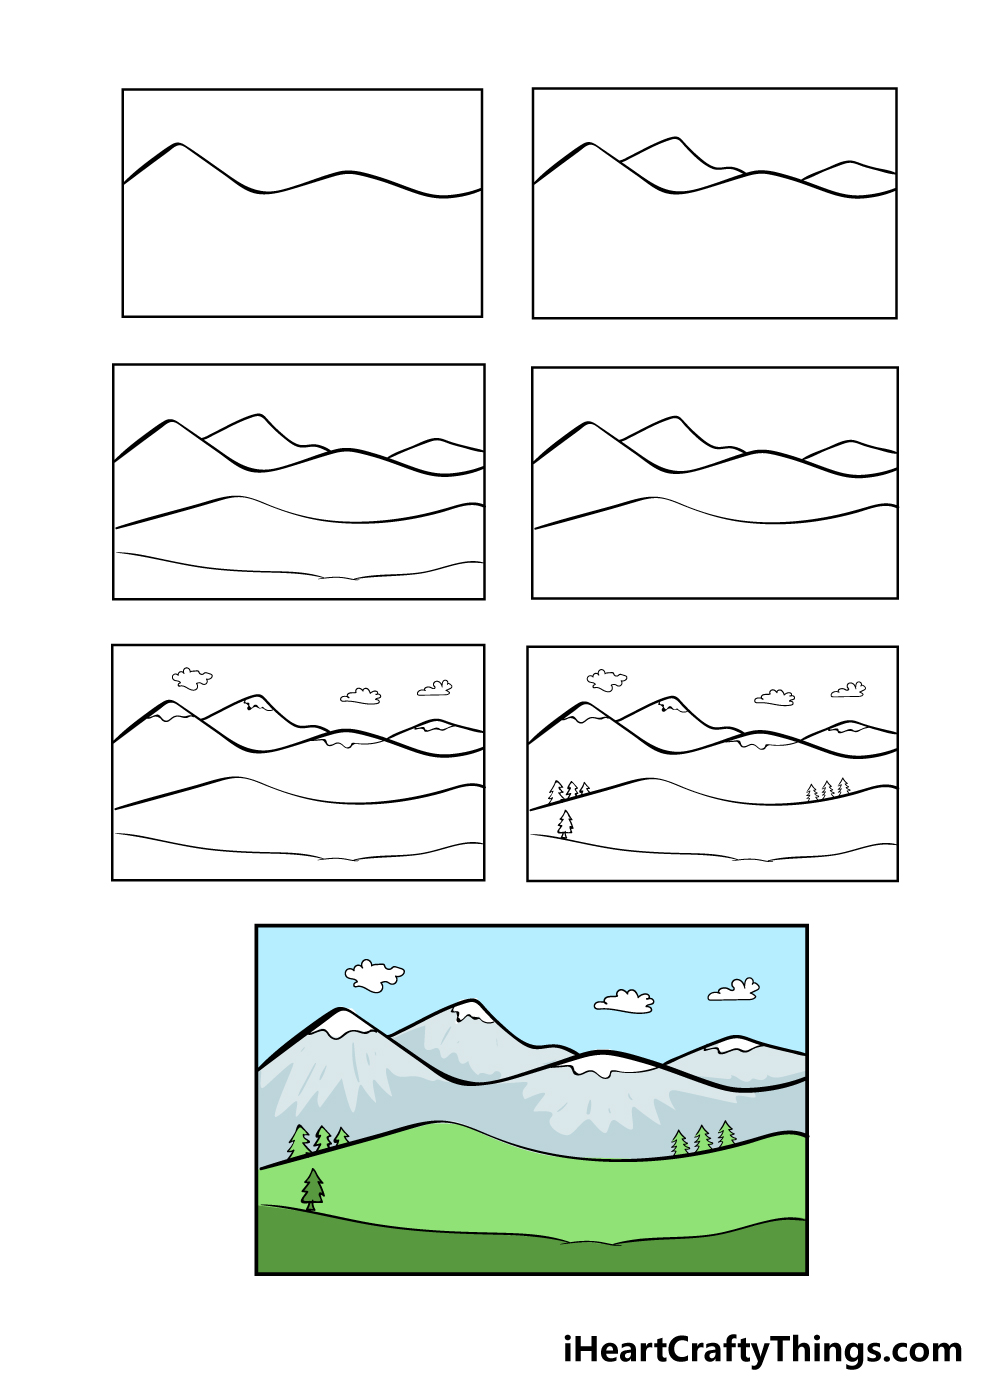 how to draw mountain in 7 steps